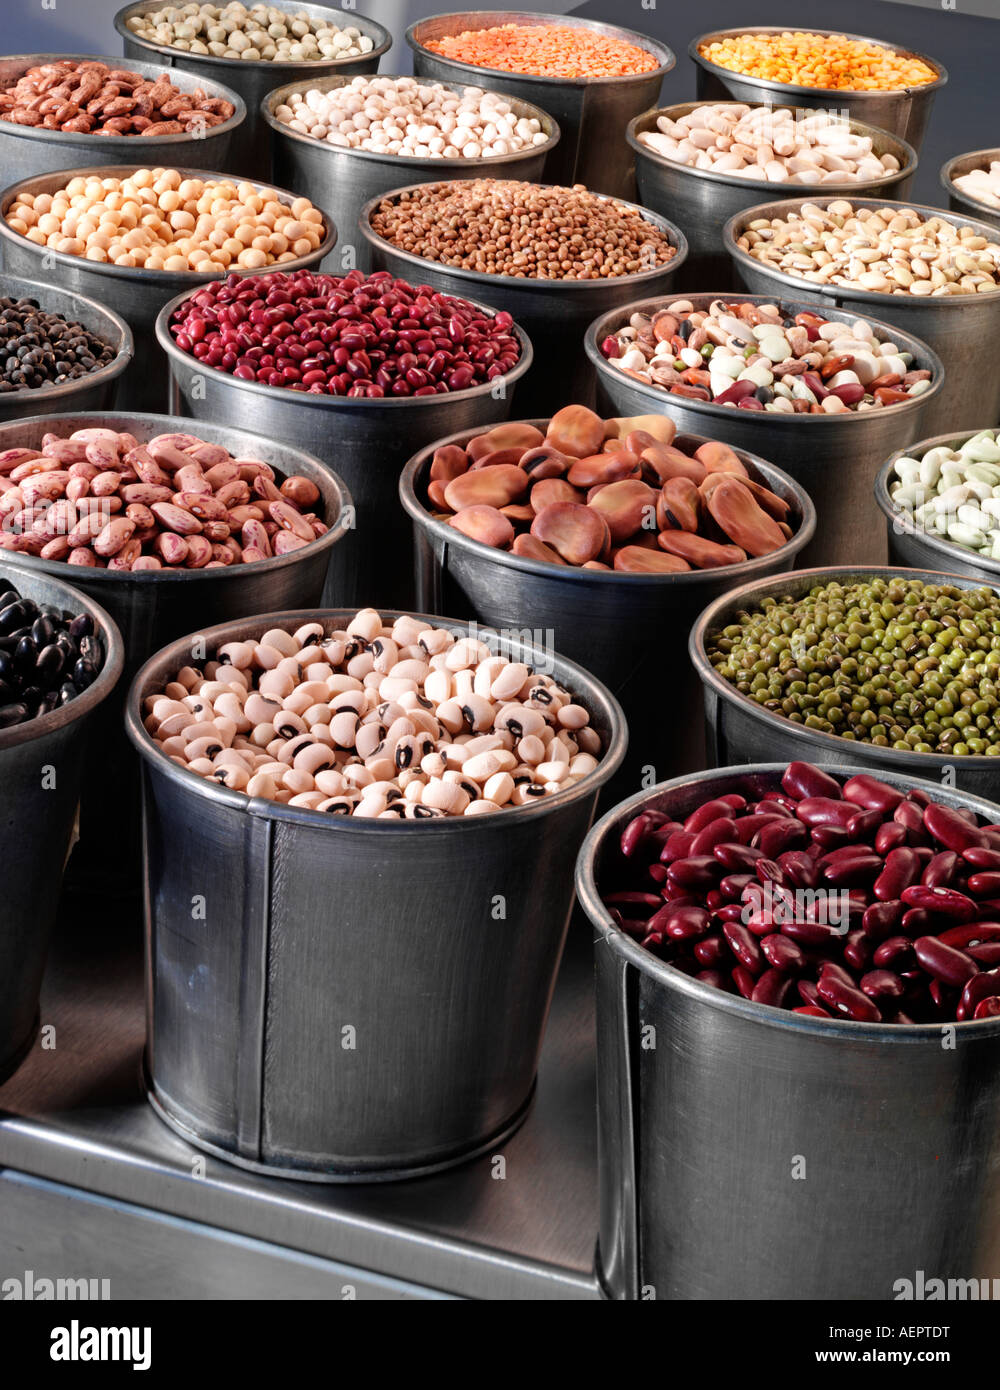 SELECTION OF BEANS AND PULSES Stock Photo